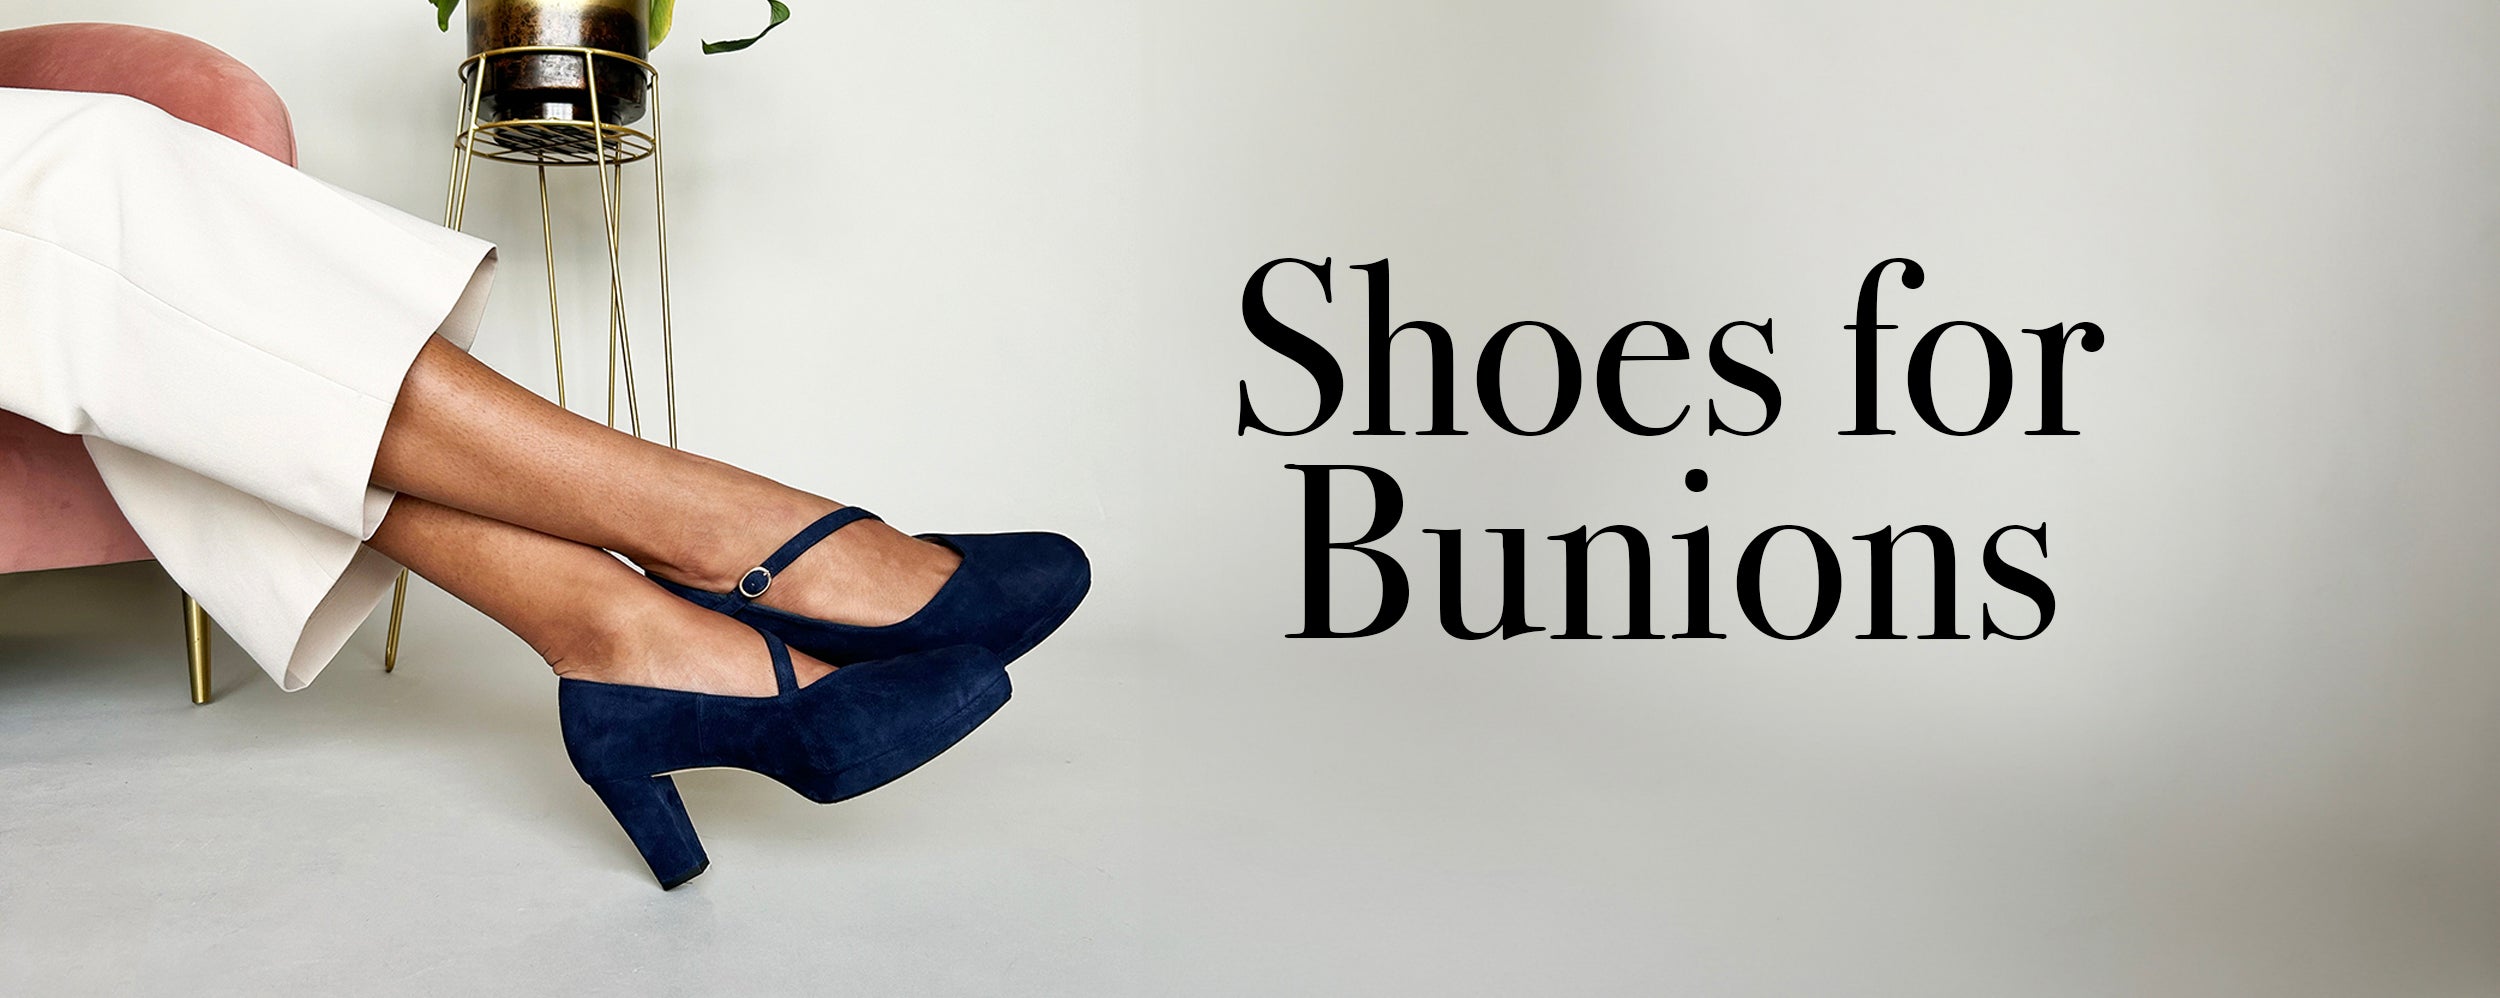 Shoes for bunions